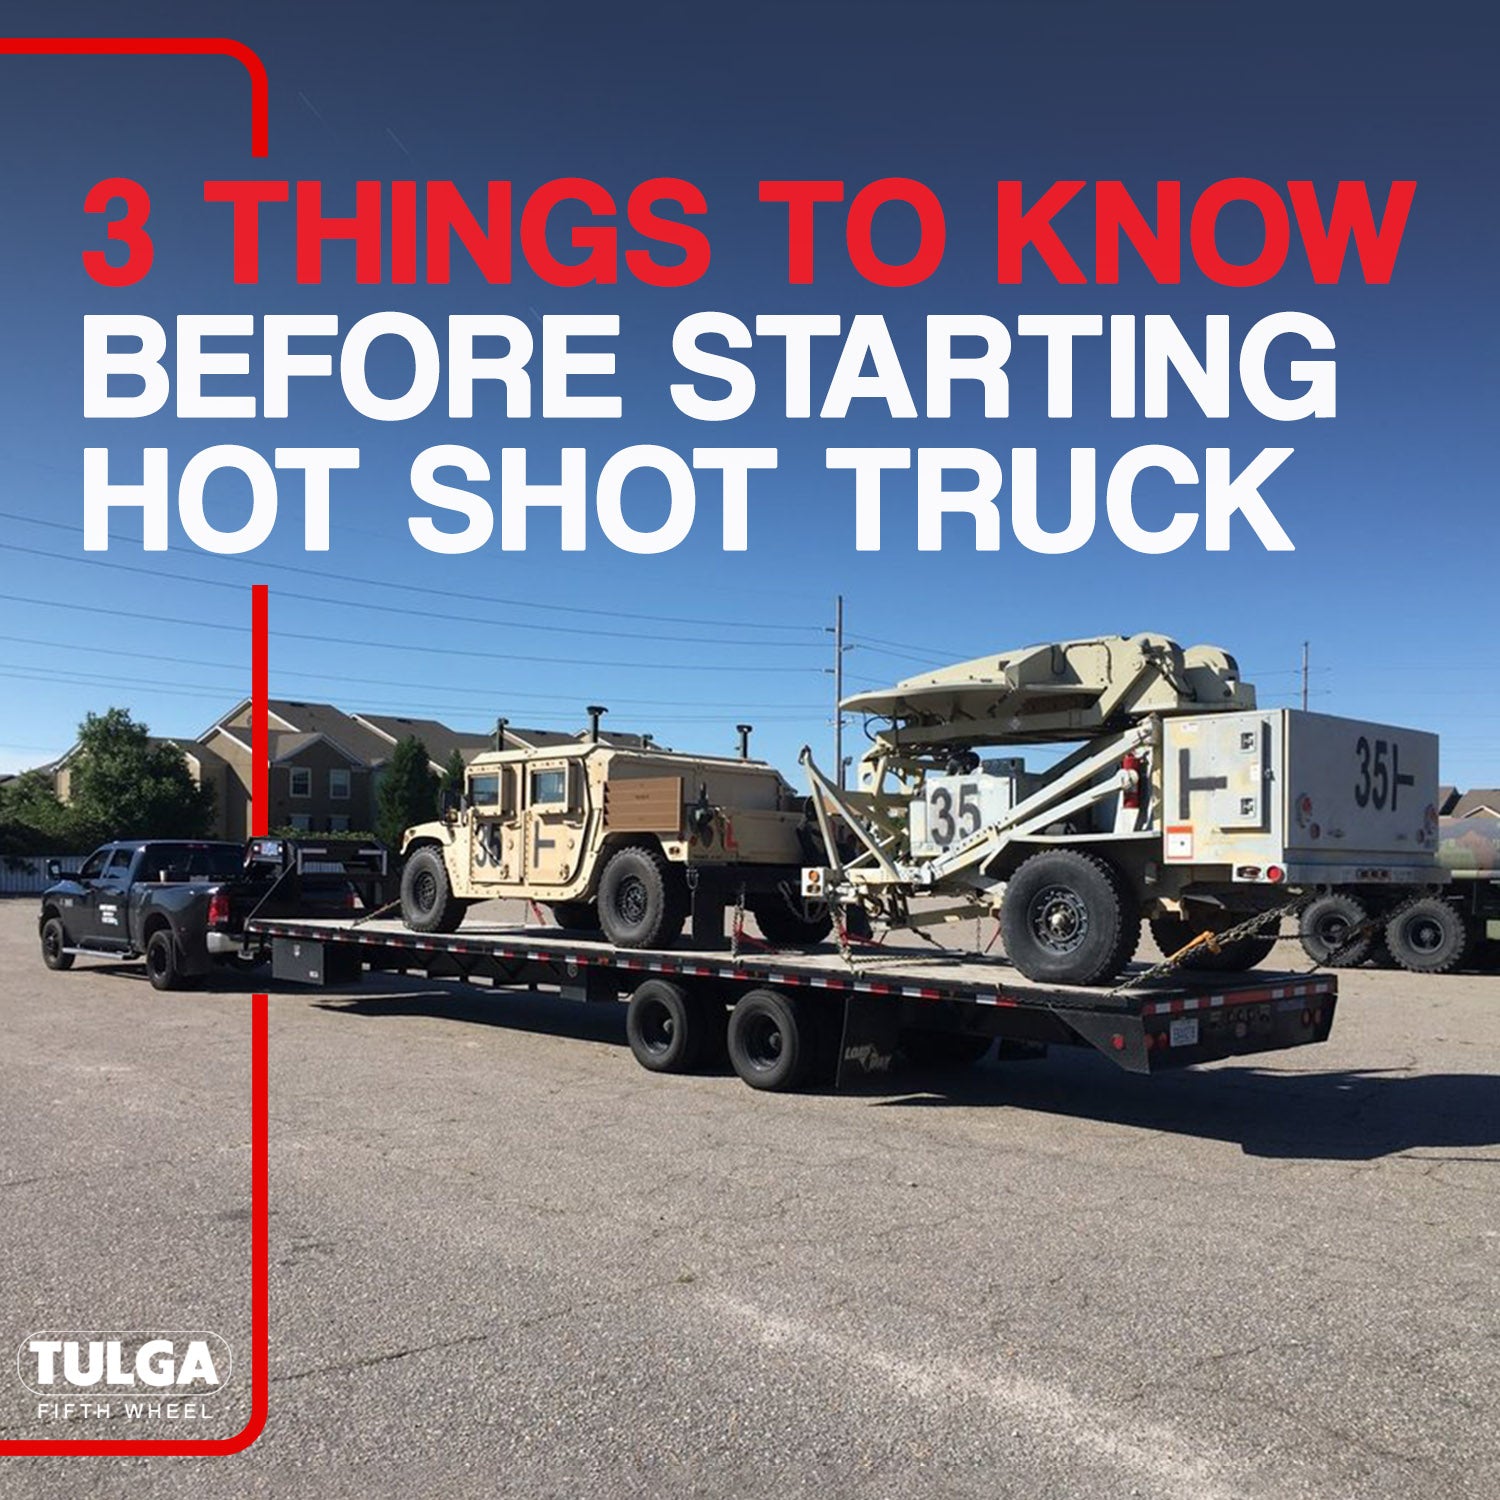 https://cdn.shopify.com/s/files/1/0880/9646/files/3_Things_to_Know_Before_Starting_Hot_Shot_Truck.jpg?v=1661680419